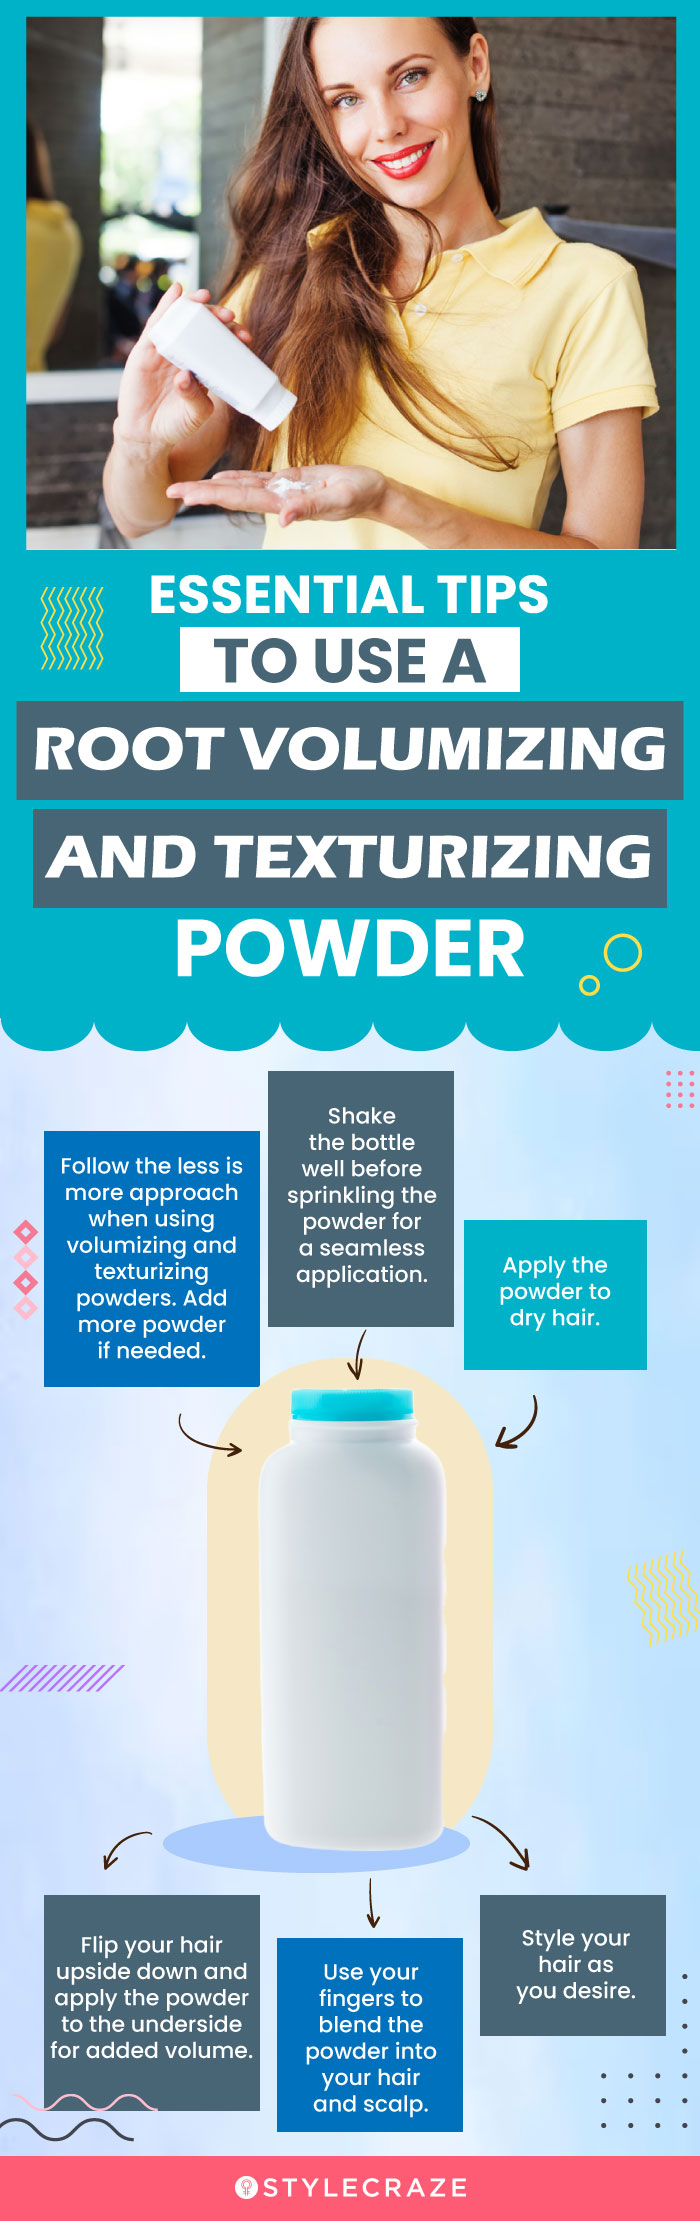 Essential Tips To Use A Root Volumizing And Texturizing Powder (infographic)